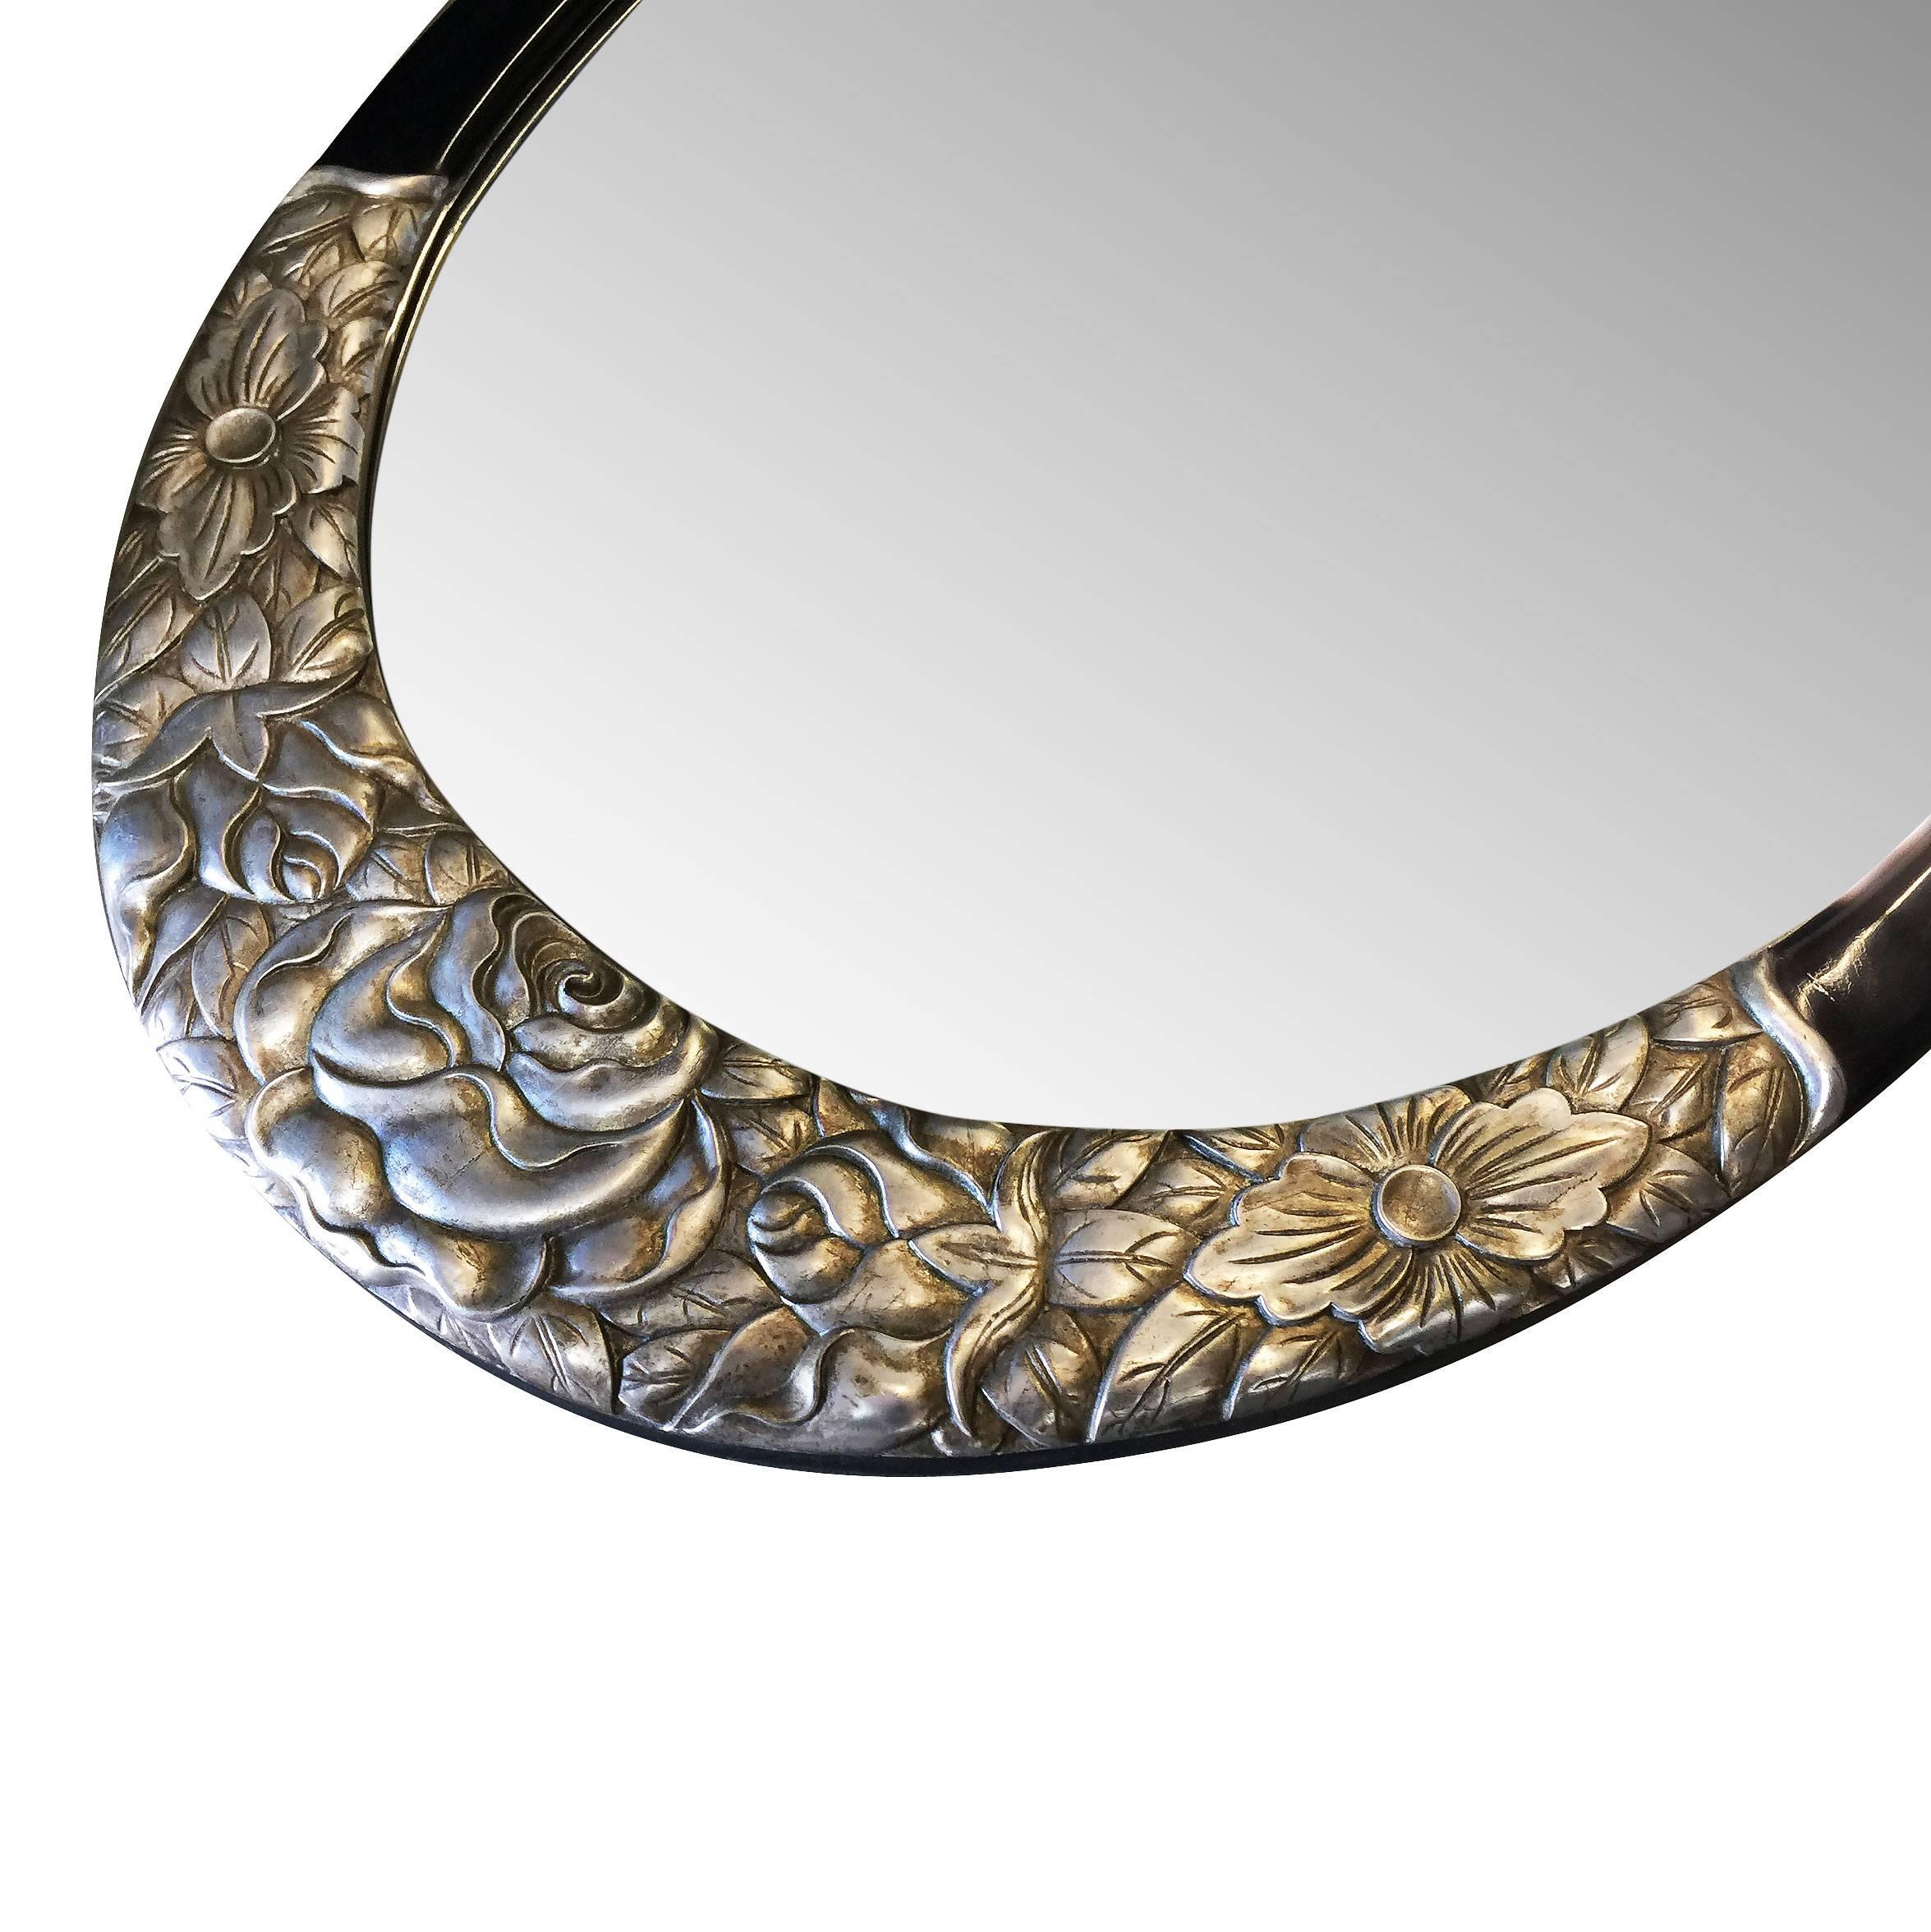 This large oval mirror in the style of Sue (Louis Sue 1875-1968) et Mare (Andre Mare 1887-1932) has a beautiful elaborately hand carved frame of giltwood on upper and lower sections. Upper section includes gilded floral carvings that extend to